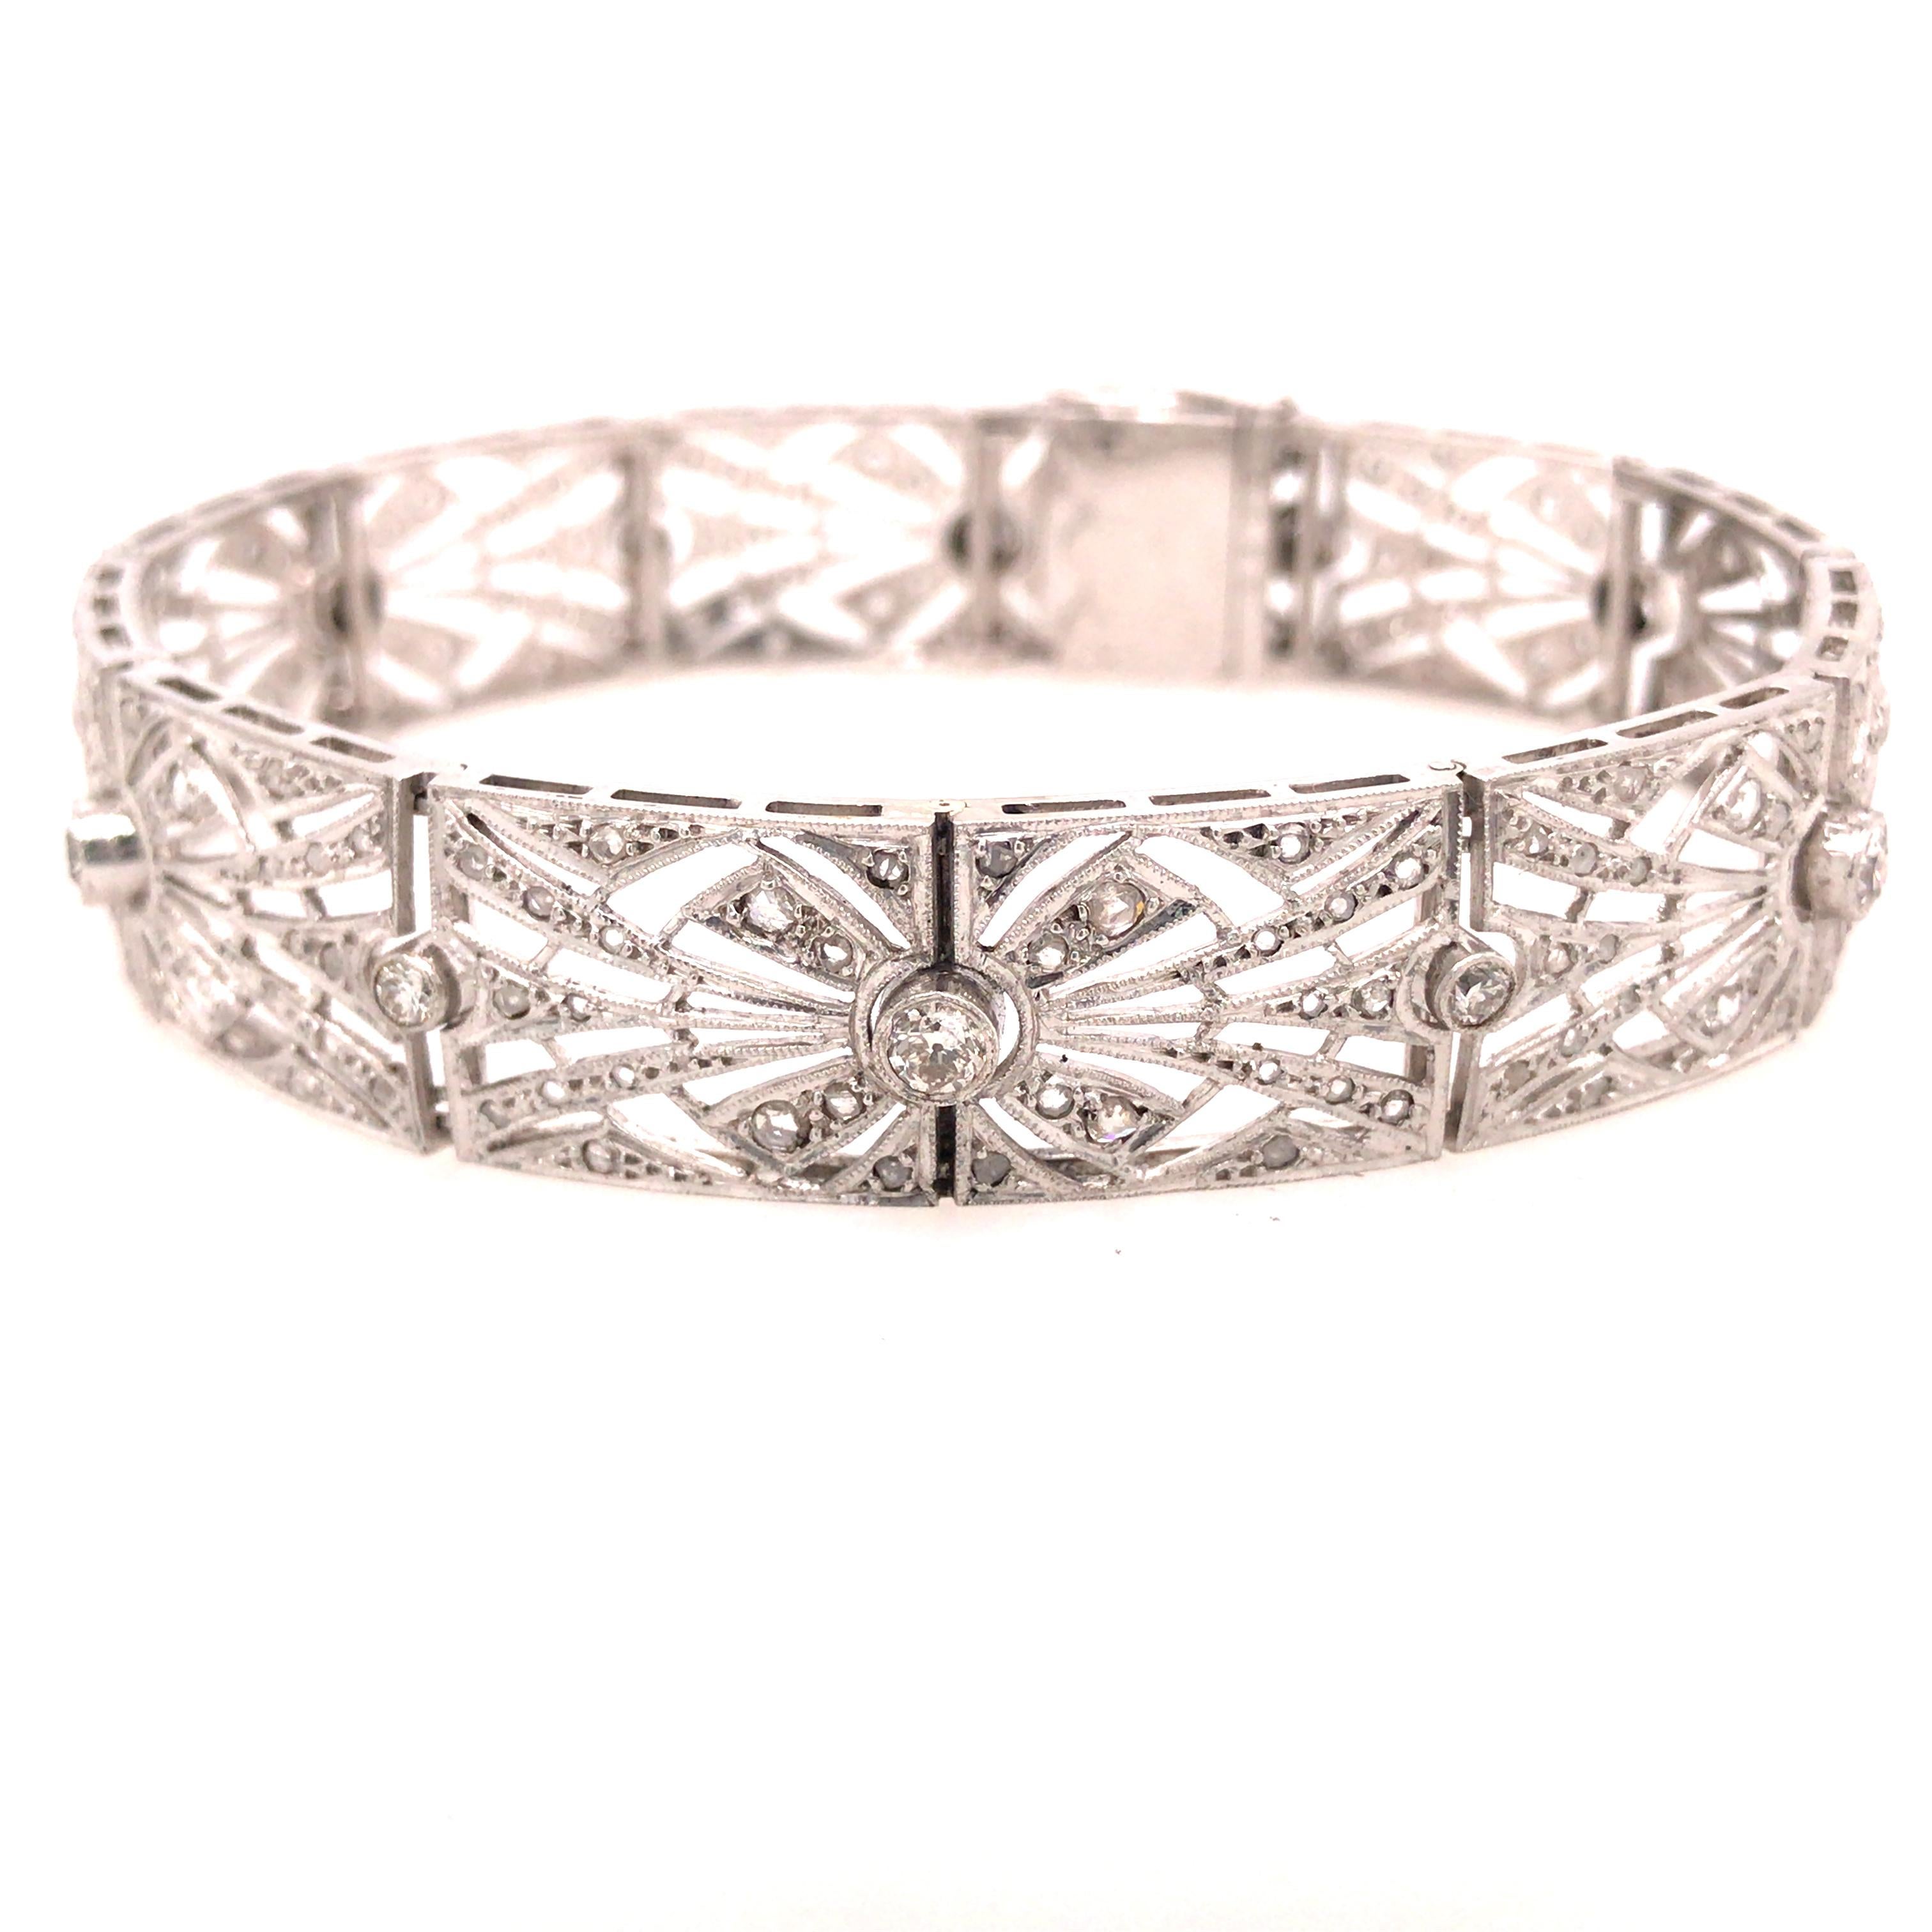 19K Art Deco French Bracelet White Gold.  Round Brilliant Cut Diamonds weighing 2.12 carat total weight G-H in color and VS-I1 in color are expertly set.  The Bracelet measures 7 1/2 inch in length and 1/2 inch in width.  29.70 grams.  Serial Number